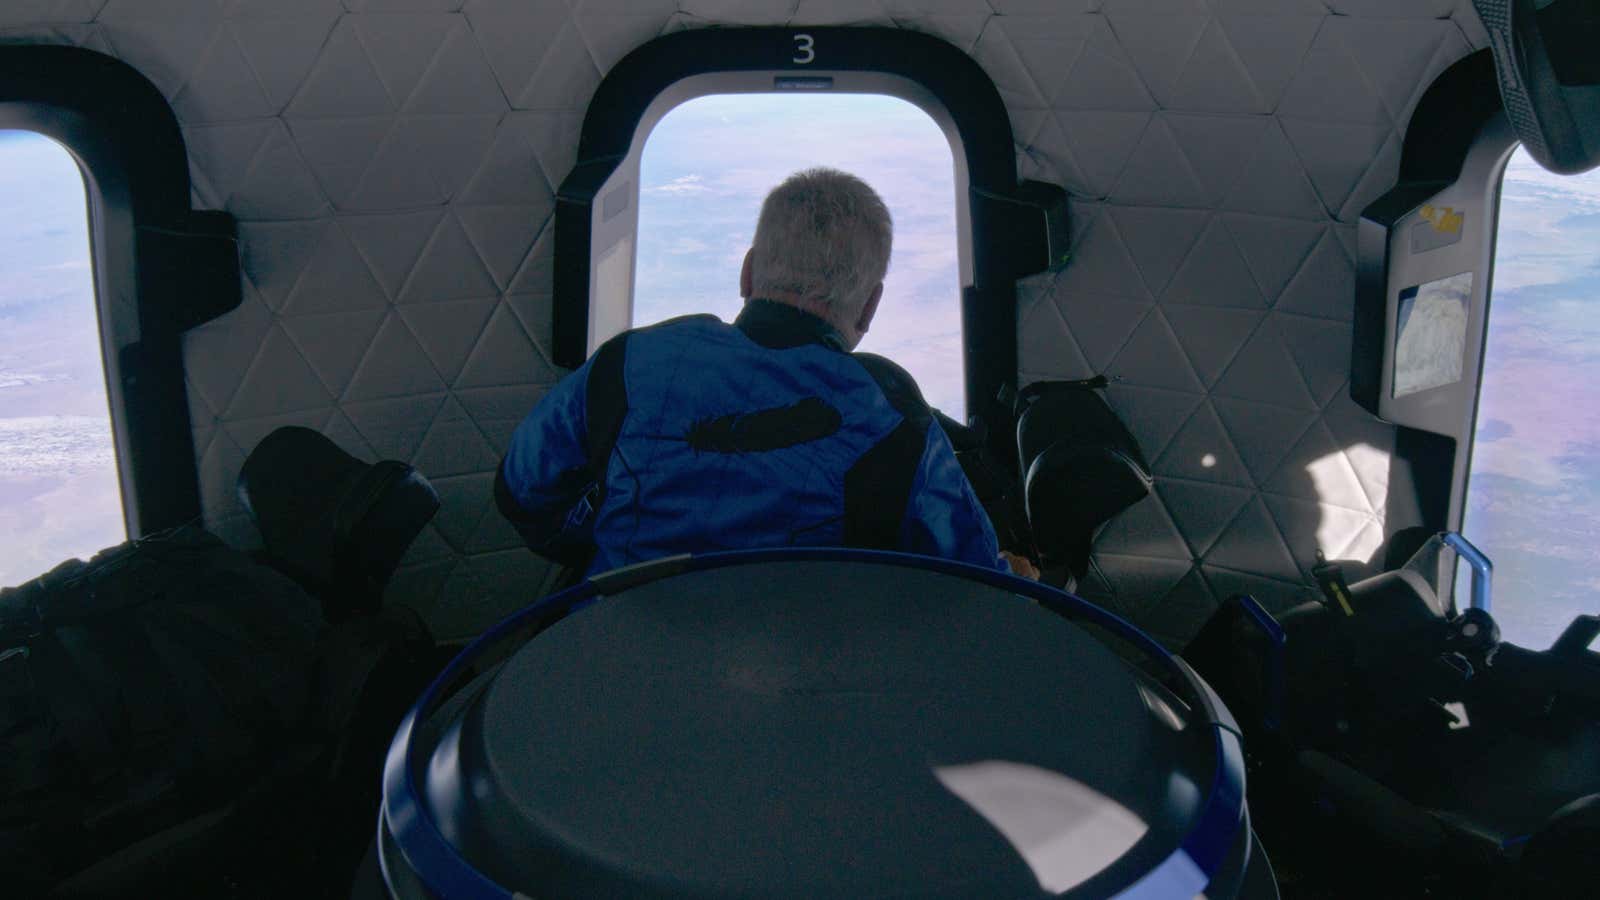 William Shatner looks out the window of Blue Origin’s New Shepard space capsule.